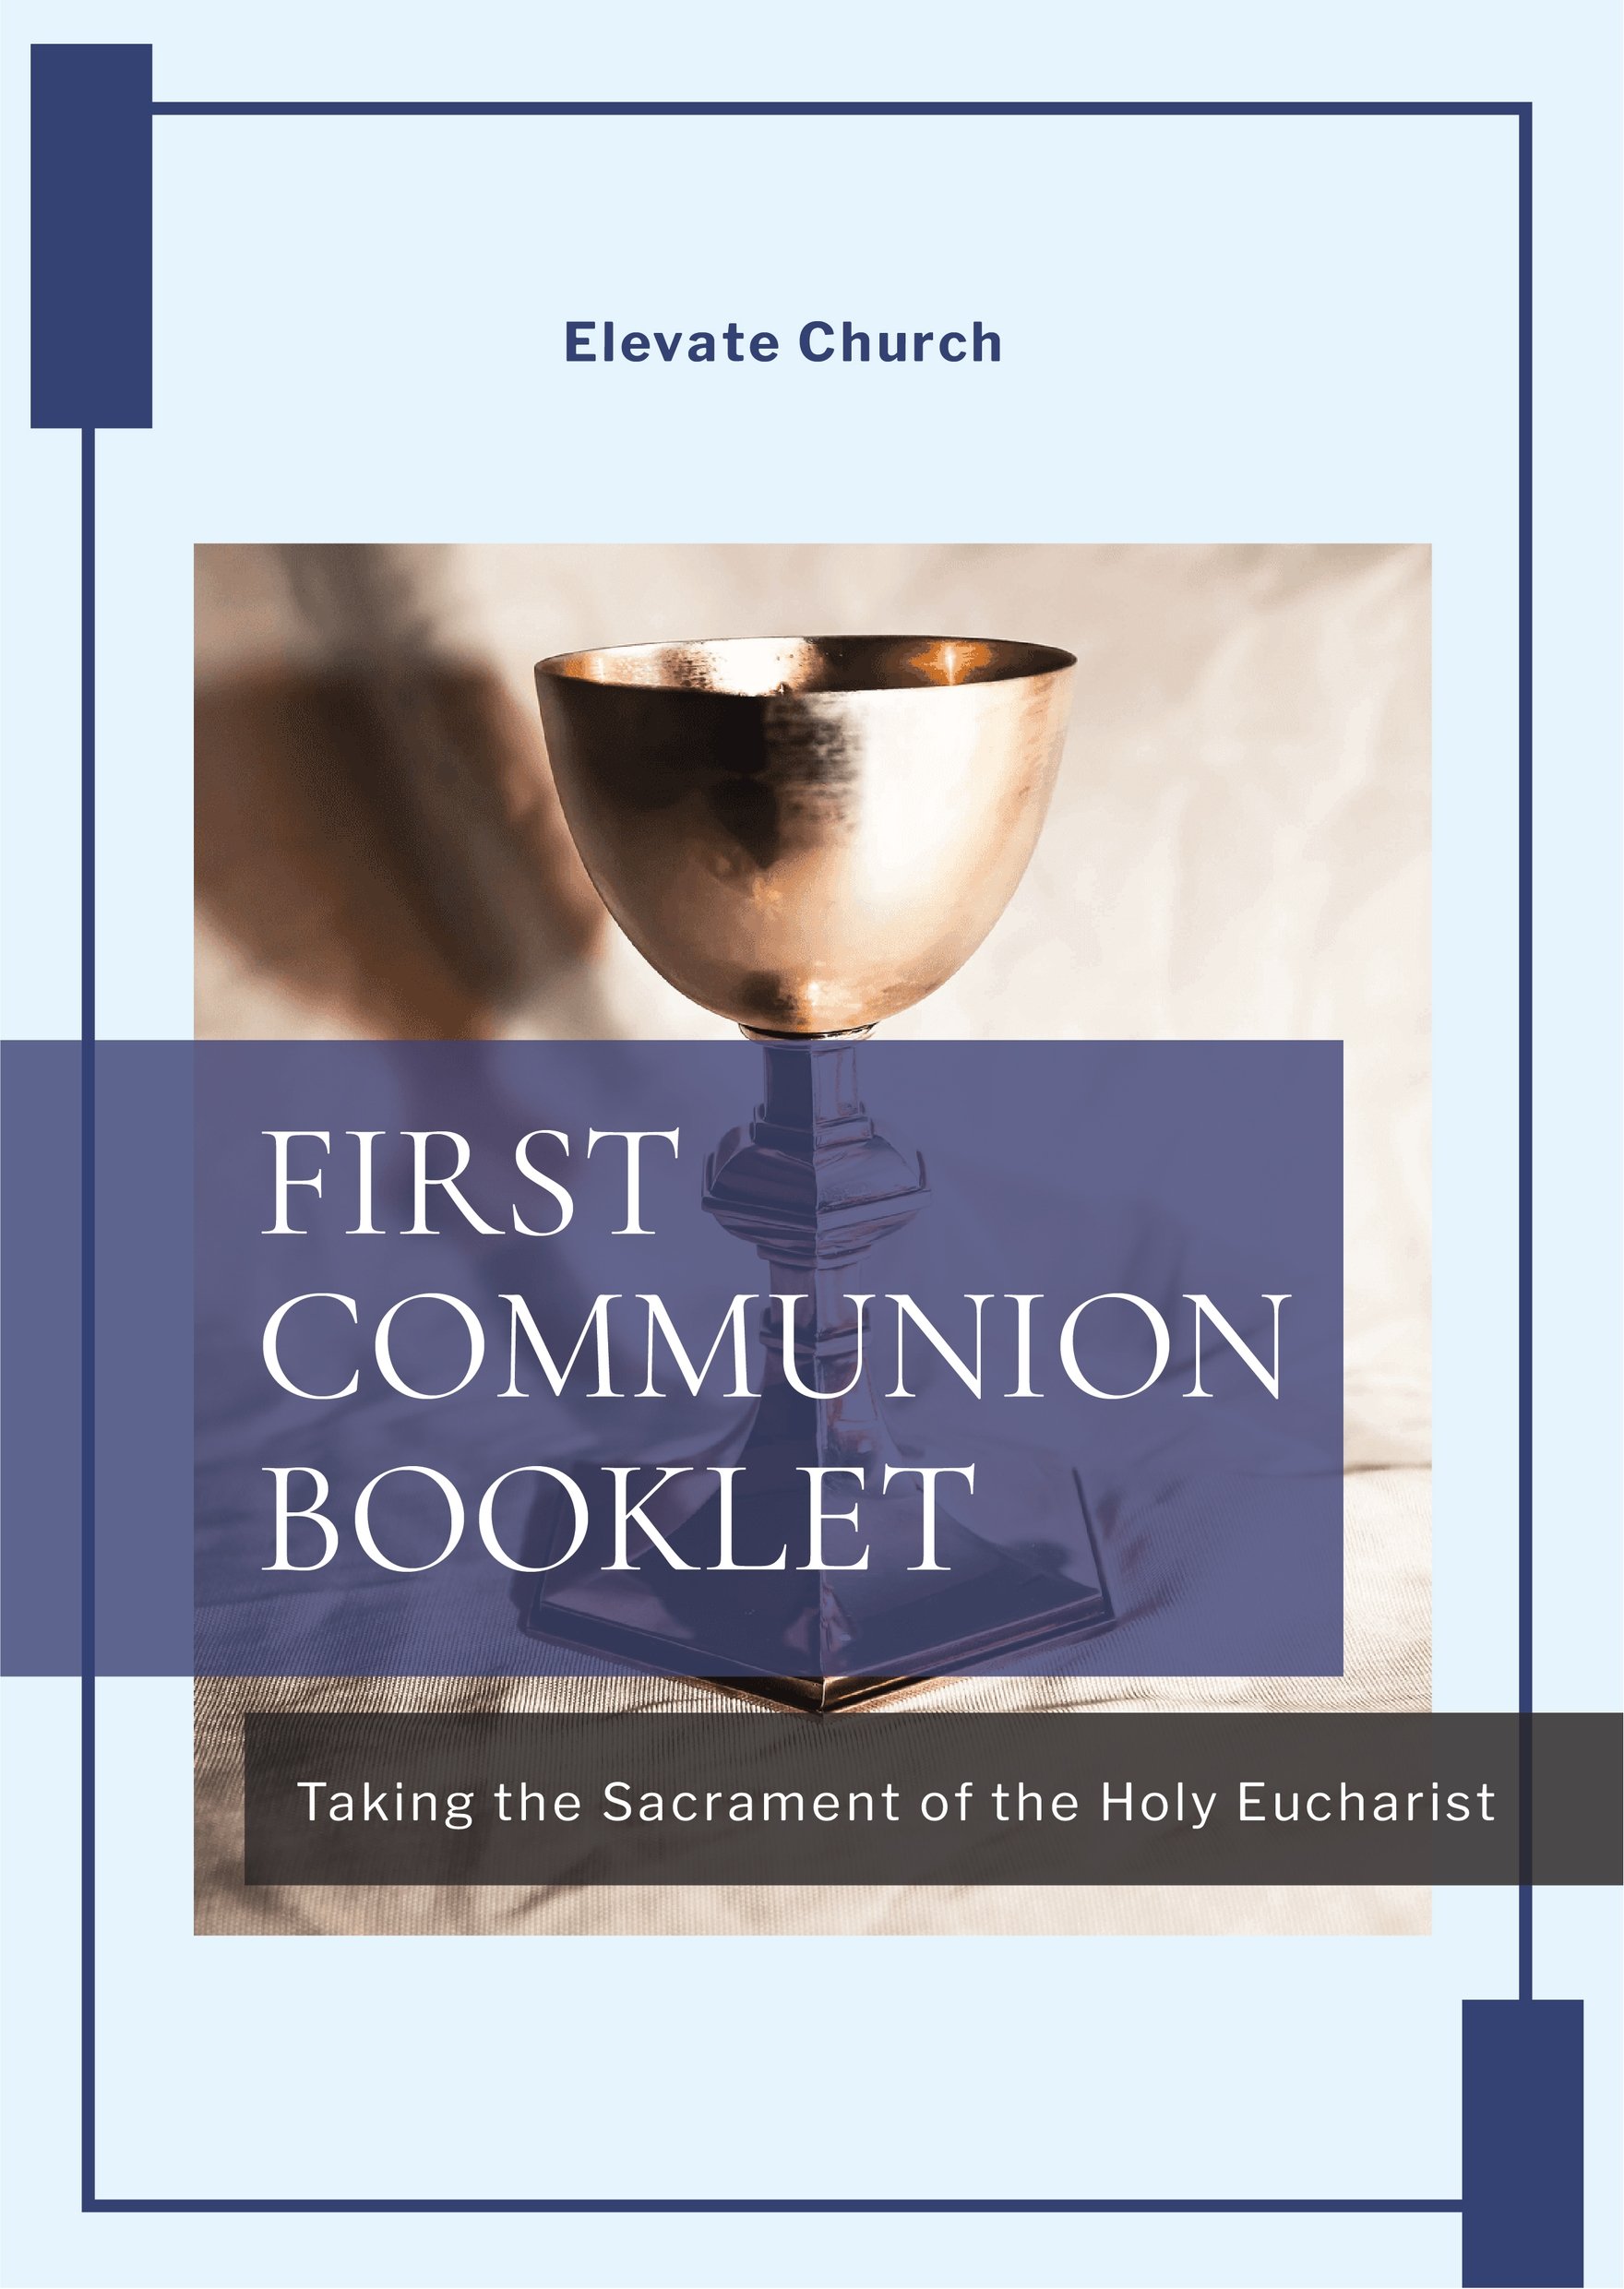 Free First Communion Booklet Template in Word, Google Docs, Illustrator, PSD, Apple Pages, Publisher, InDesign